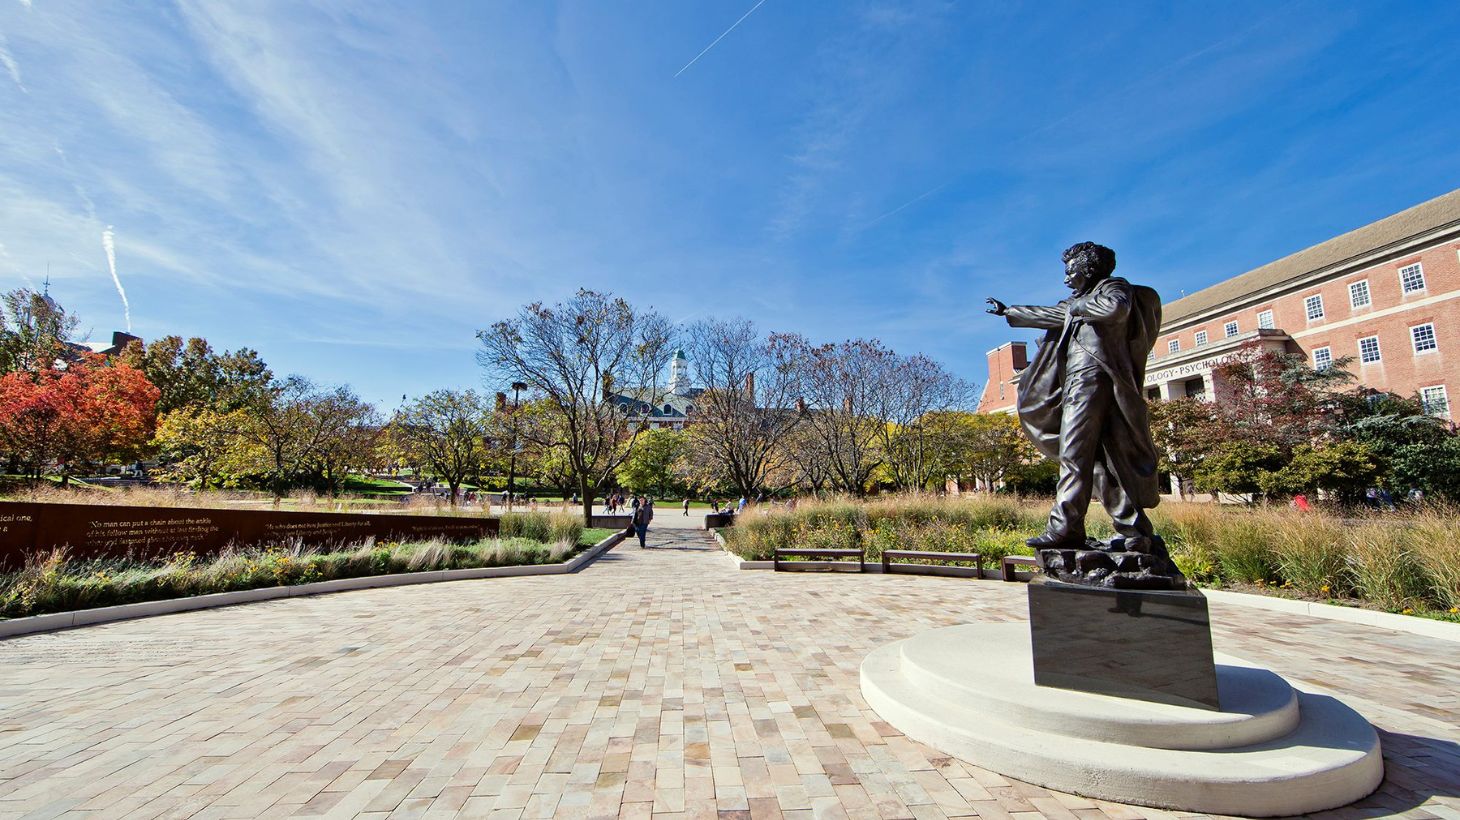 The Frederick Douglass statue at the University of Maryland.